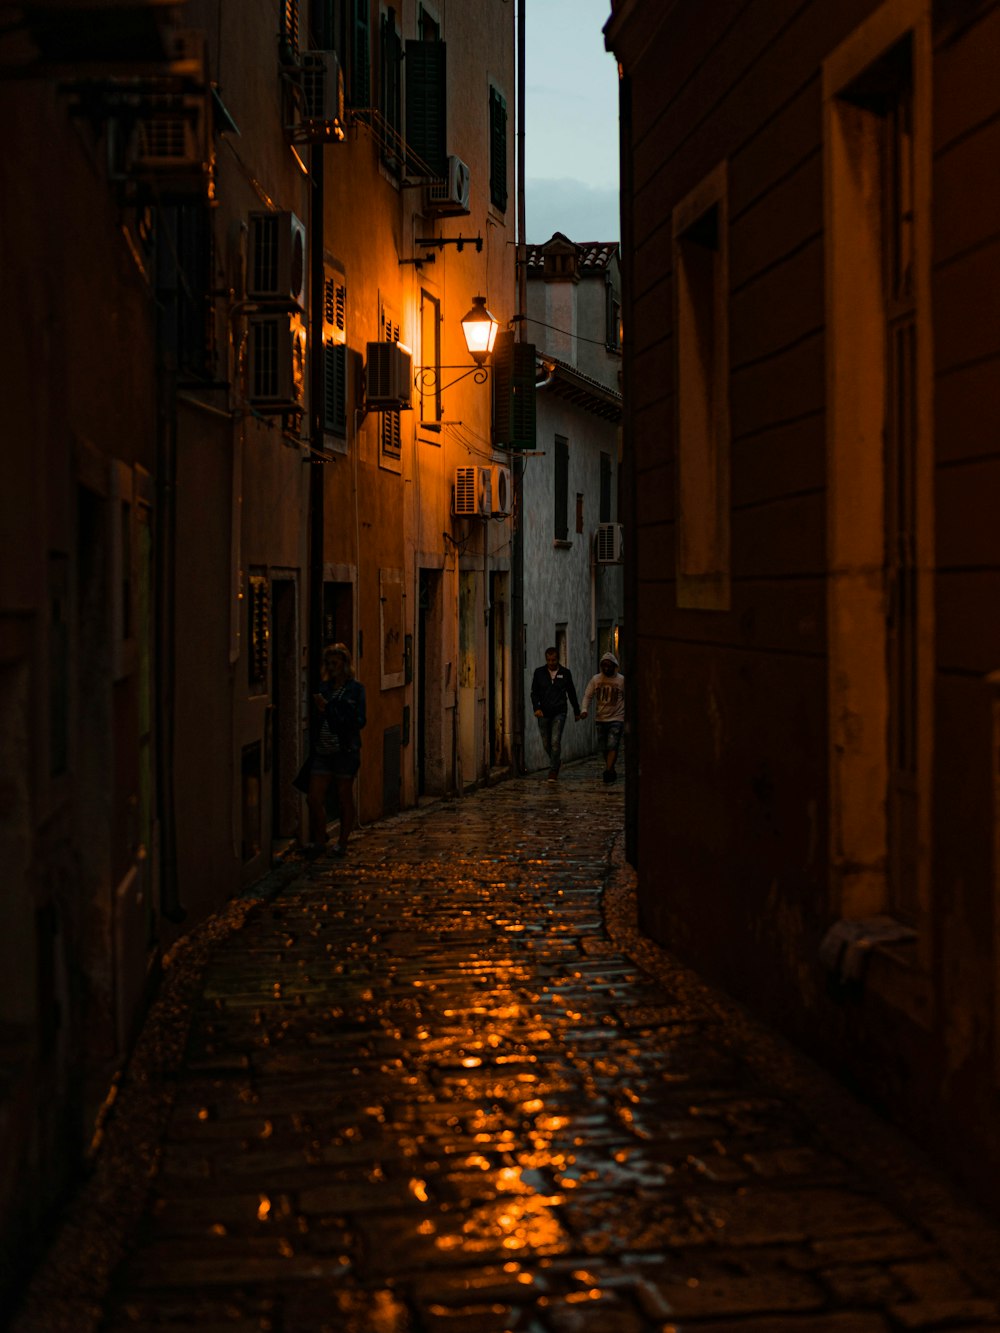 a narrow alley way with people walking down it at night